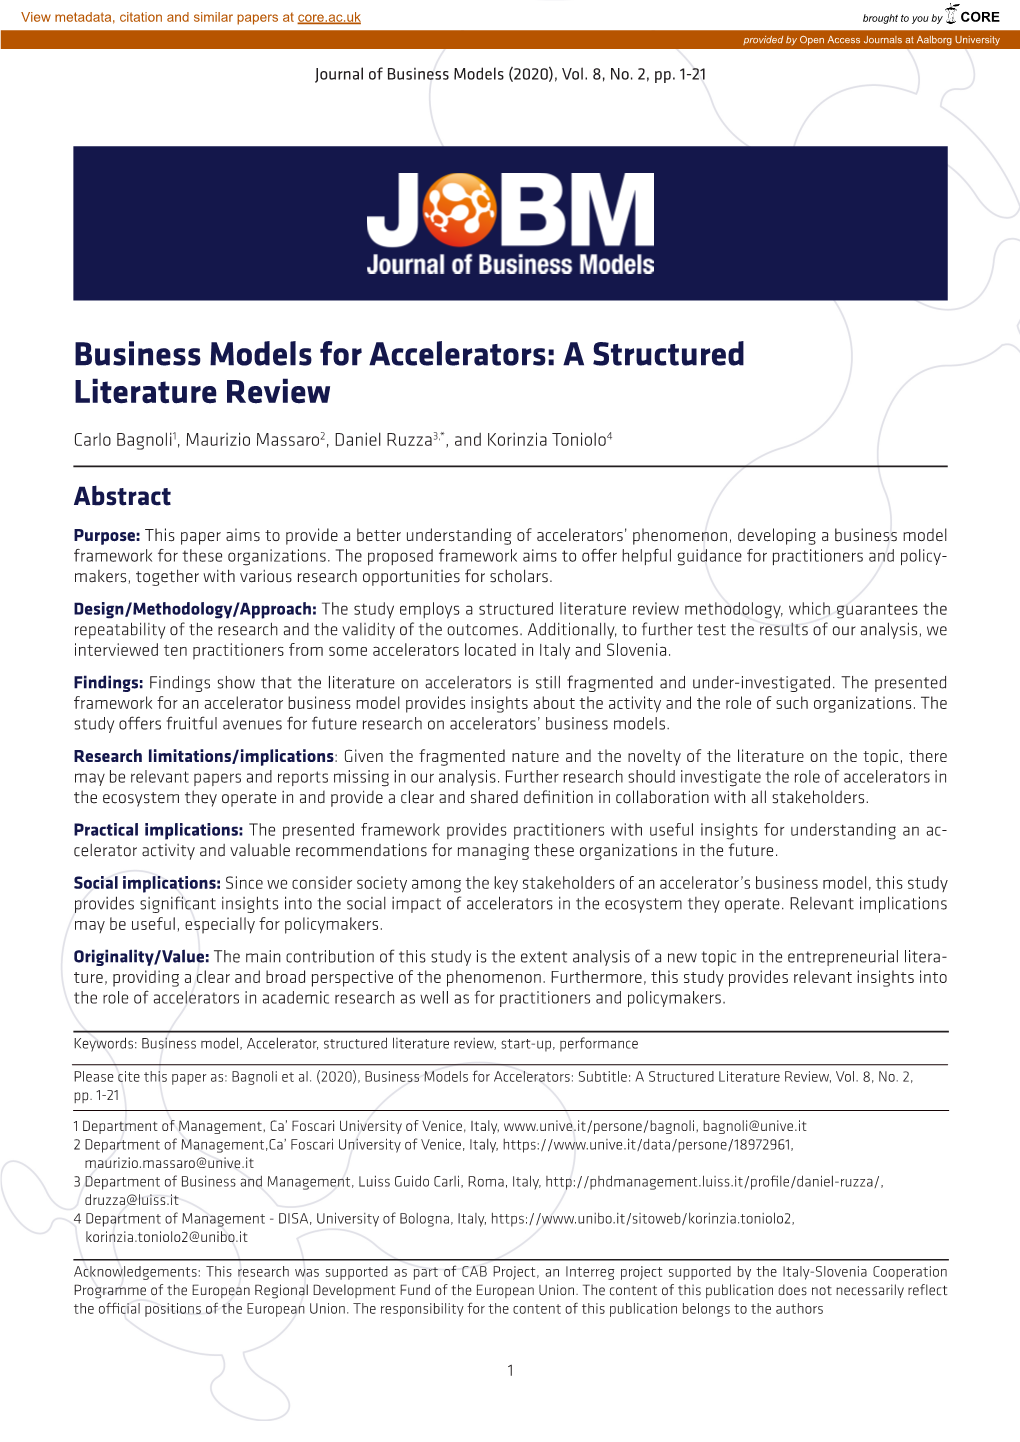 Business Models for Accelerators: a Structured Literature Review